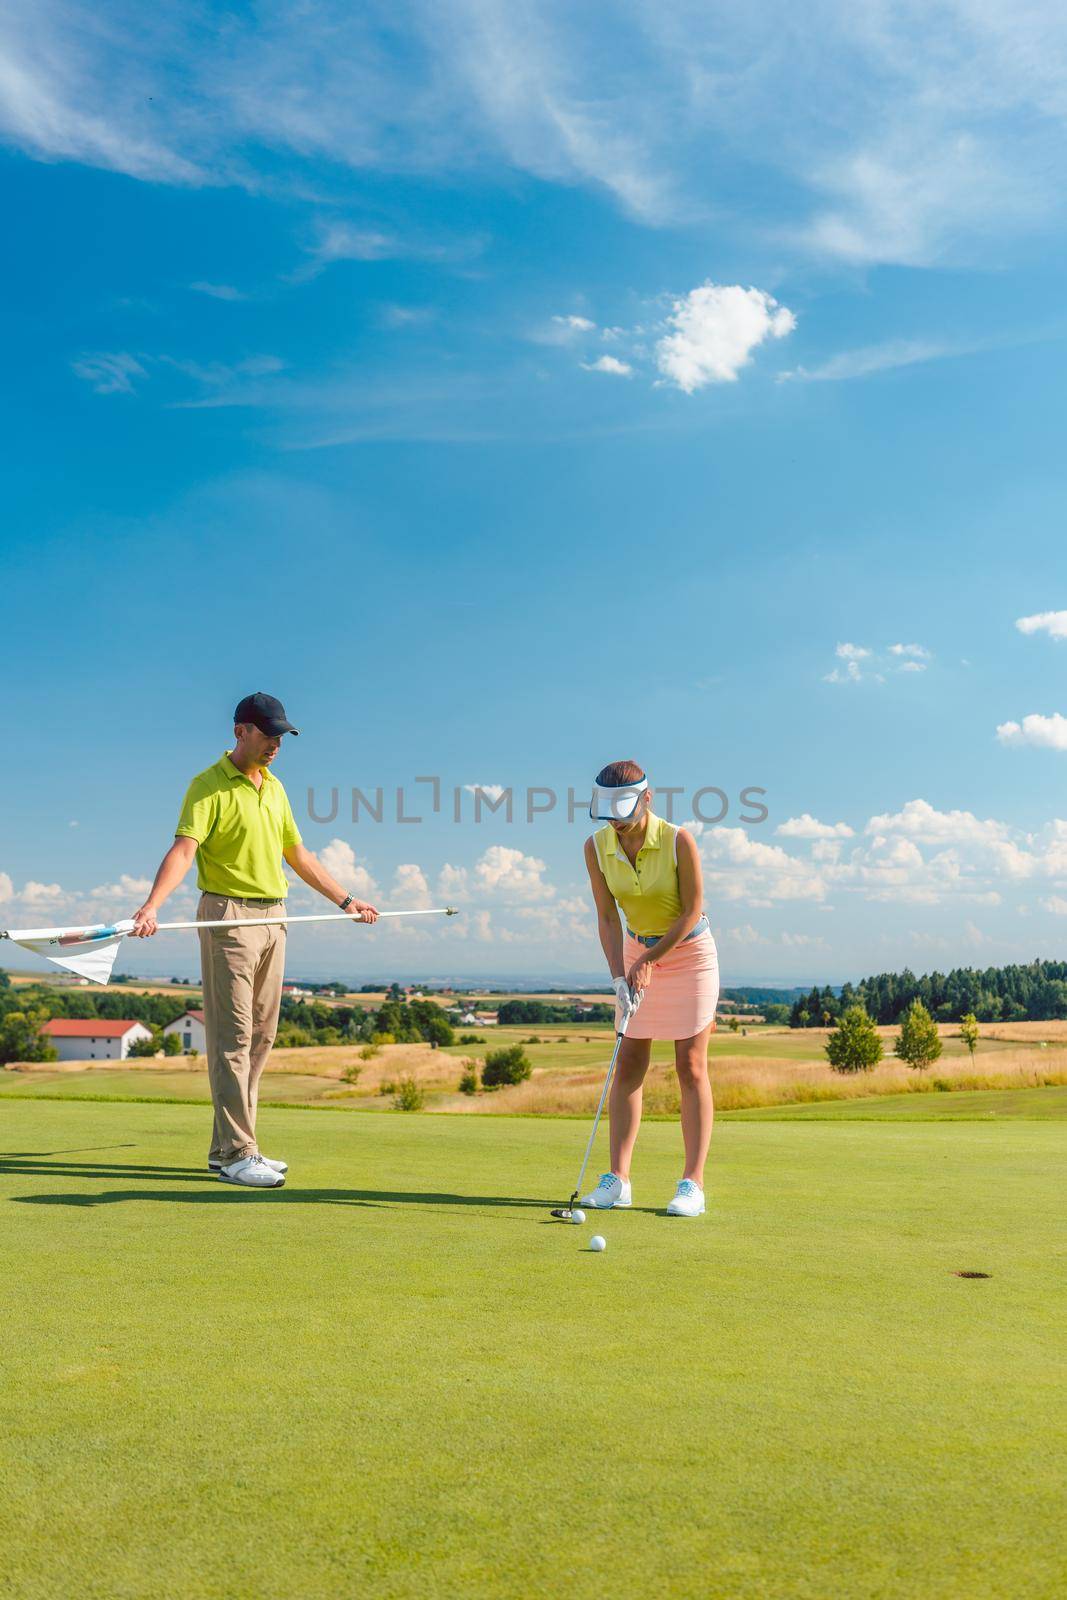 Full length of a woman calculating the trajectory of the ball to the hole, while playing professional golf with her male match partner or instructor outdoors in summer